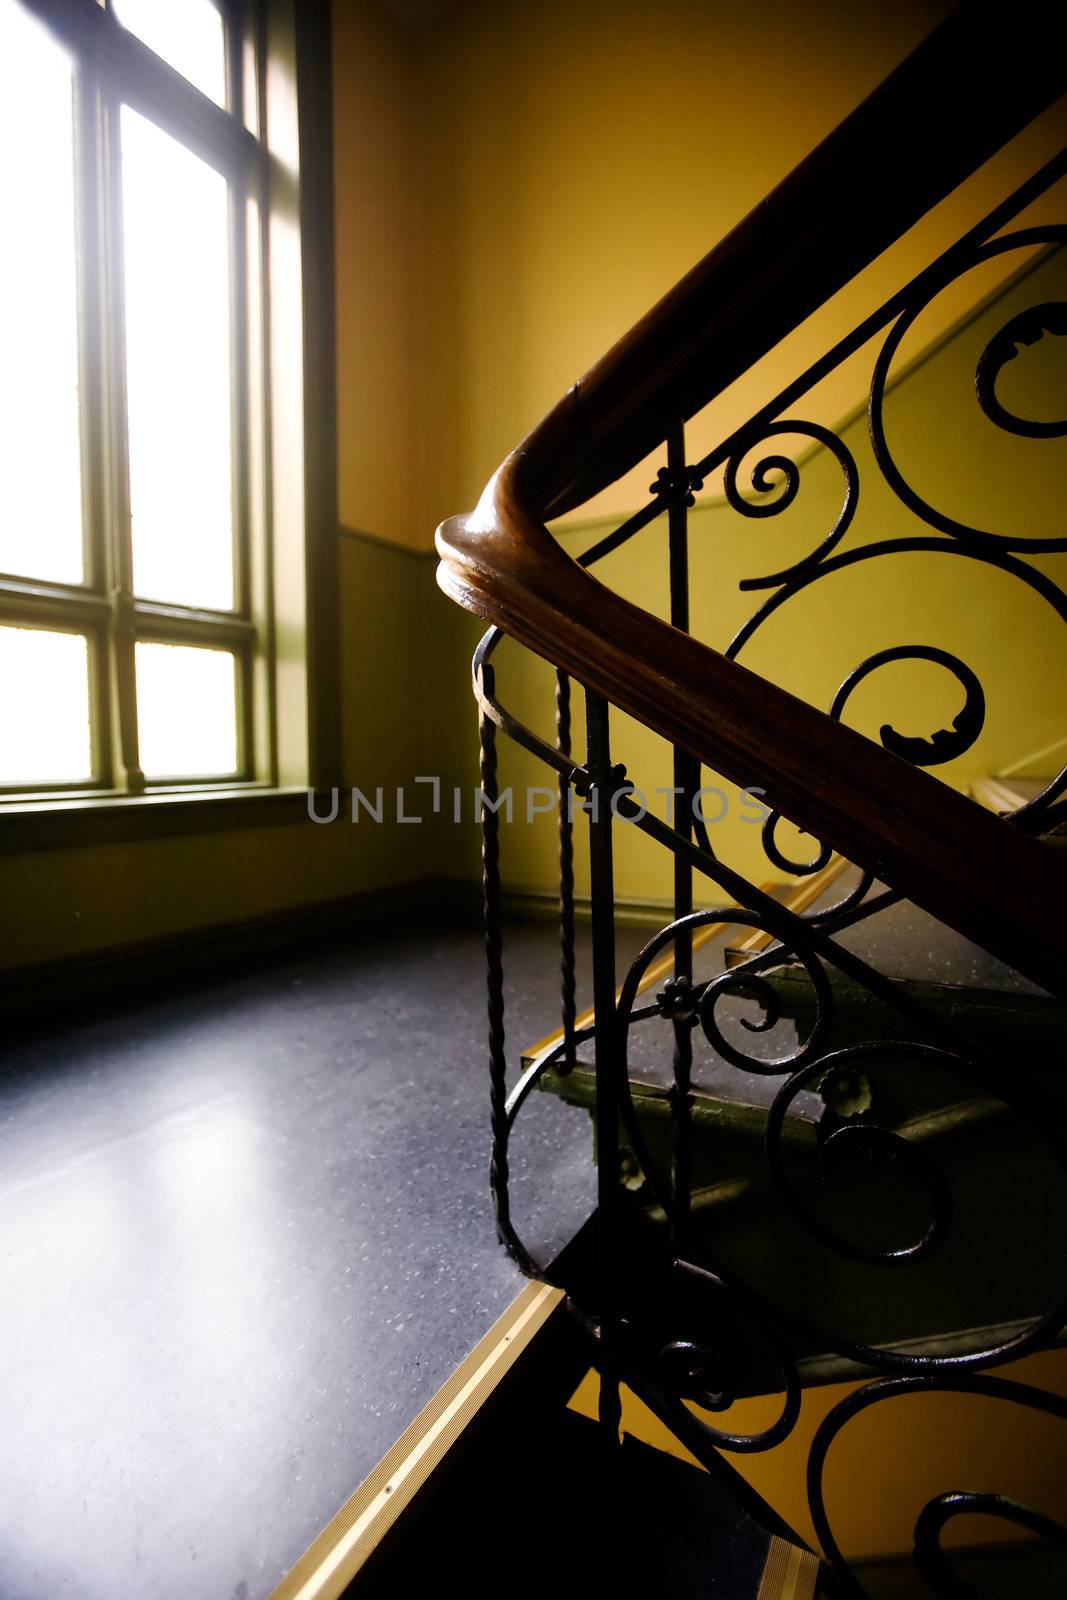 A staircase with a art nouveaux banister